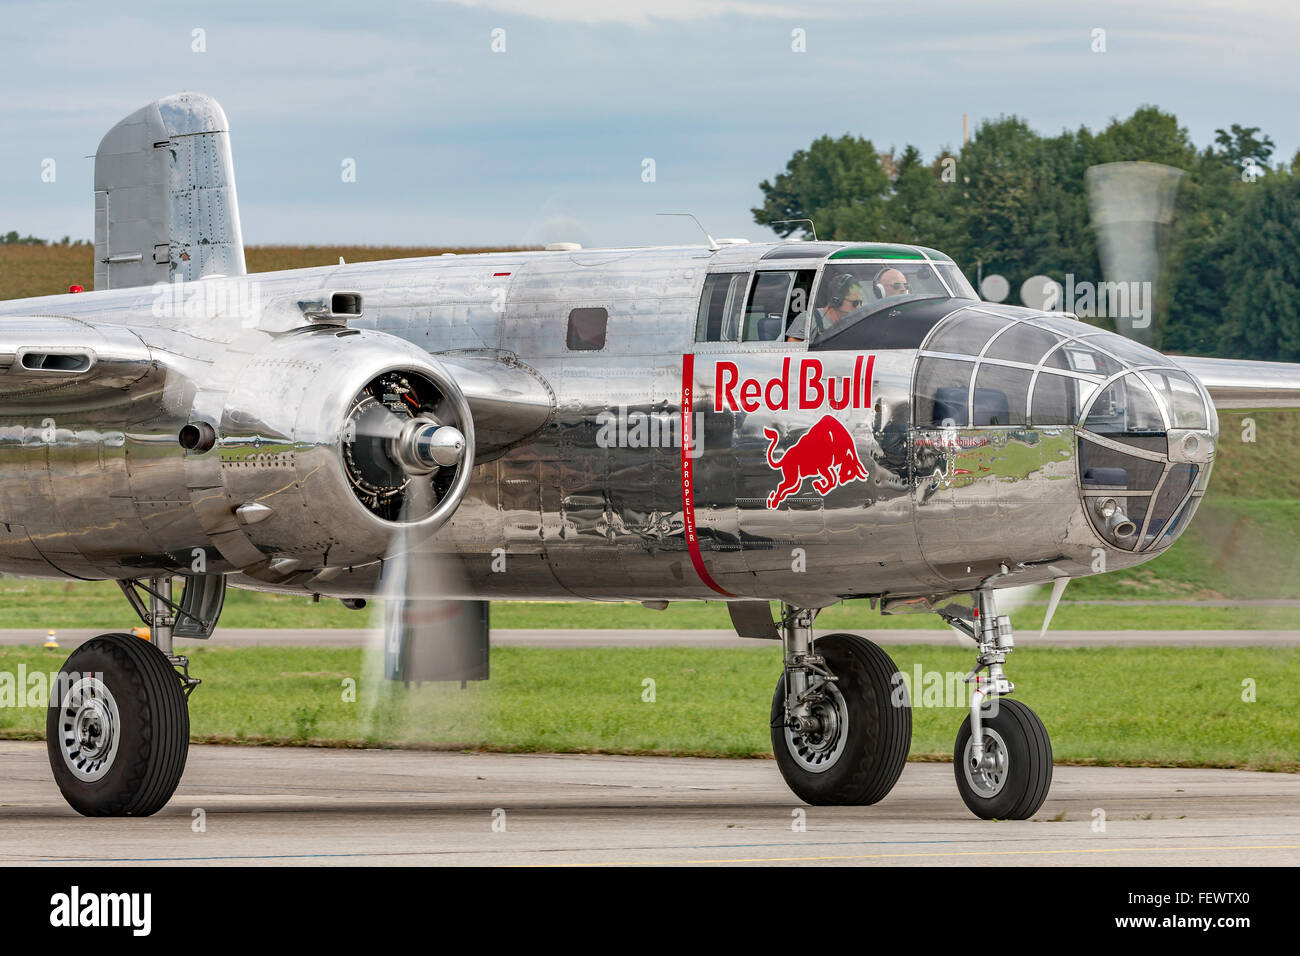 North American Aviation B-25 Mitchell bomber (registration N6123C) operated by Red Bull’s “The Flying Bulls”. Stock Photo